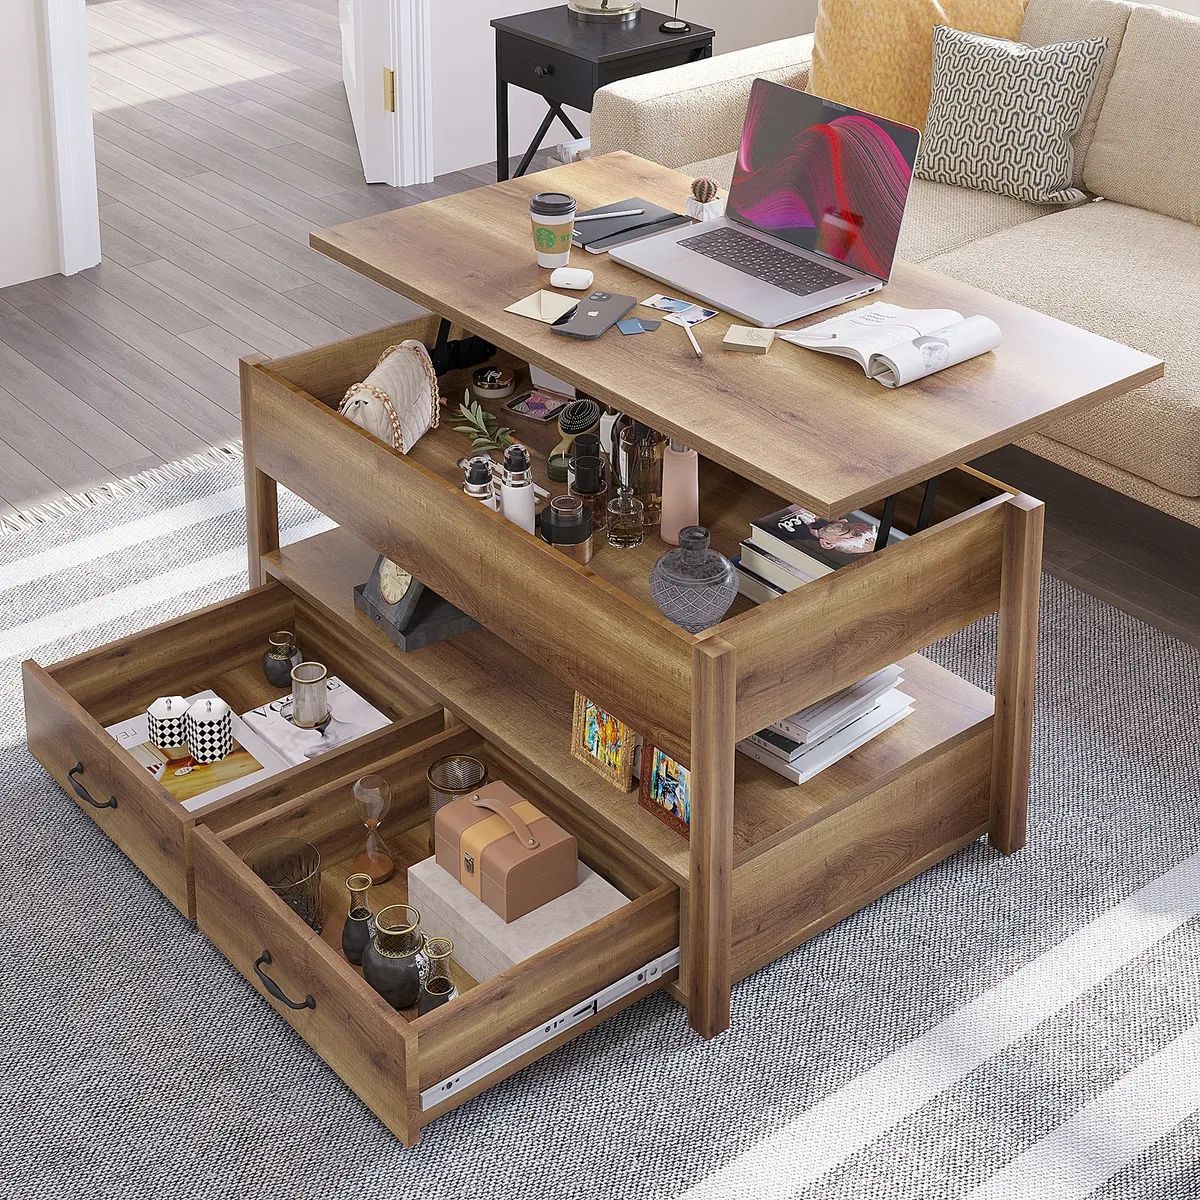 2 Drawer Lift Top Coffee Table Wooden With Hidden Compartment & Storage  Shelves | Ebay Intended For Lift Top Coffee Tables With Storage (Photo 5 of 15)